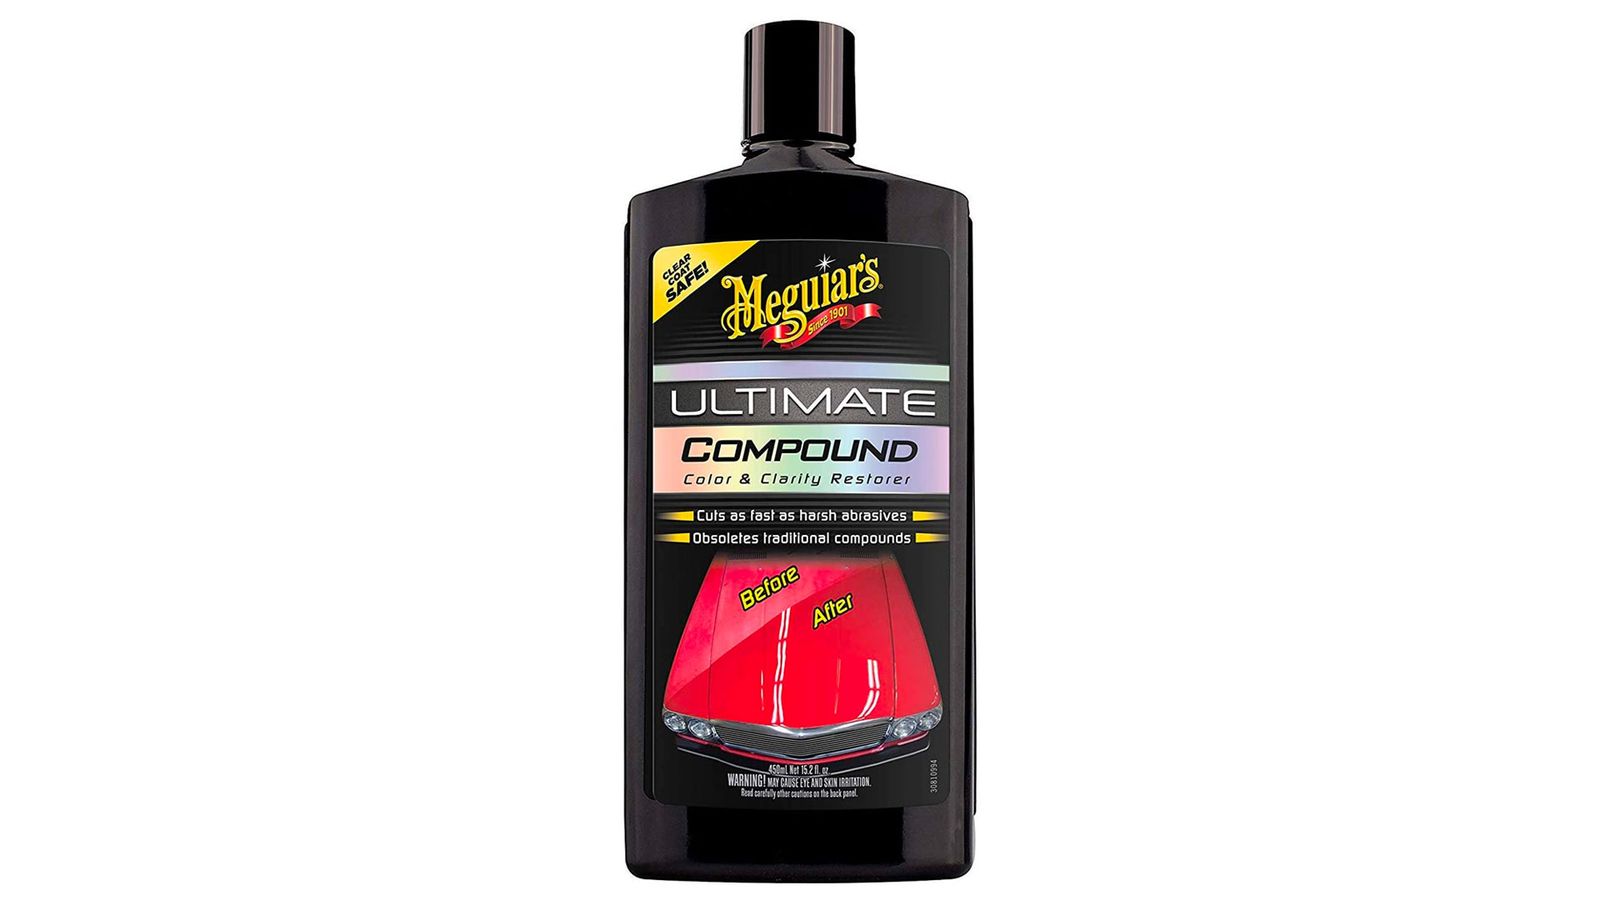 Meguiar's Ultimate Compound Colour & Clarity Restorer product image of a black bottle with a red car on the label.